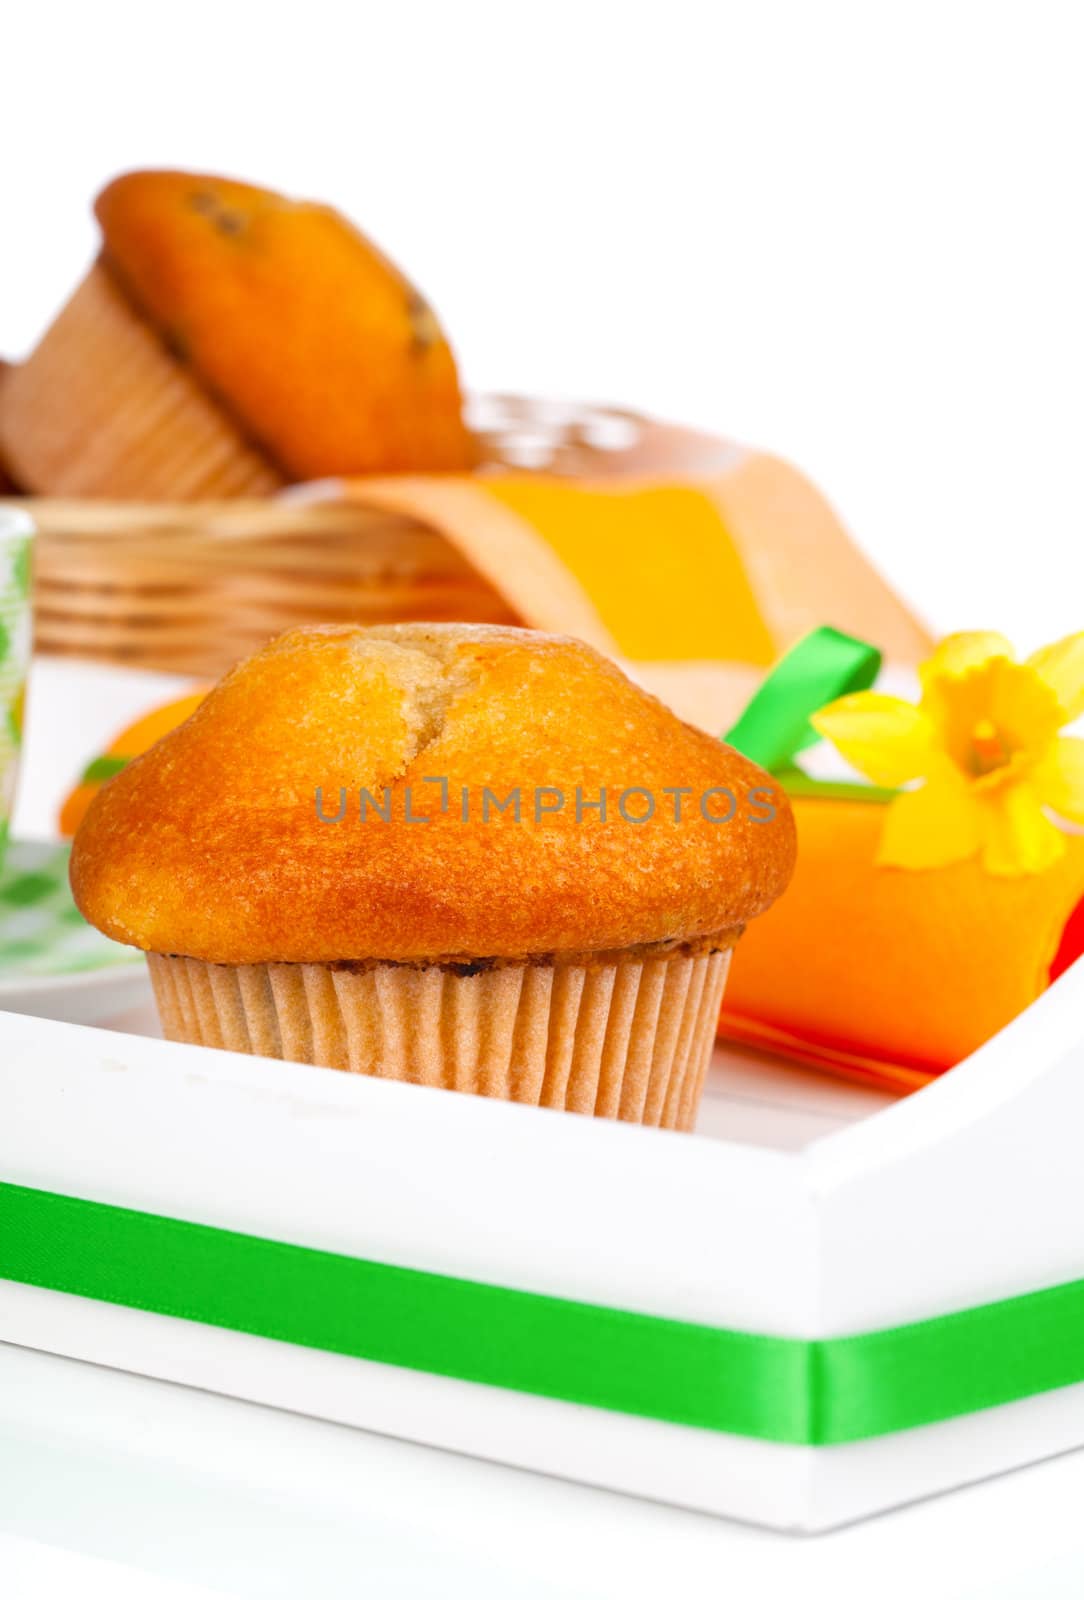 muffins in a tray for breakfast. isolated on white background. by motorolka